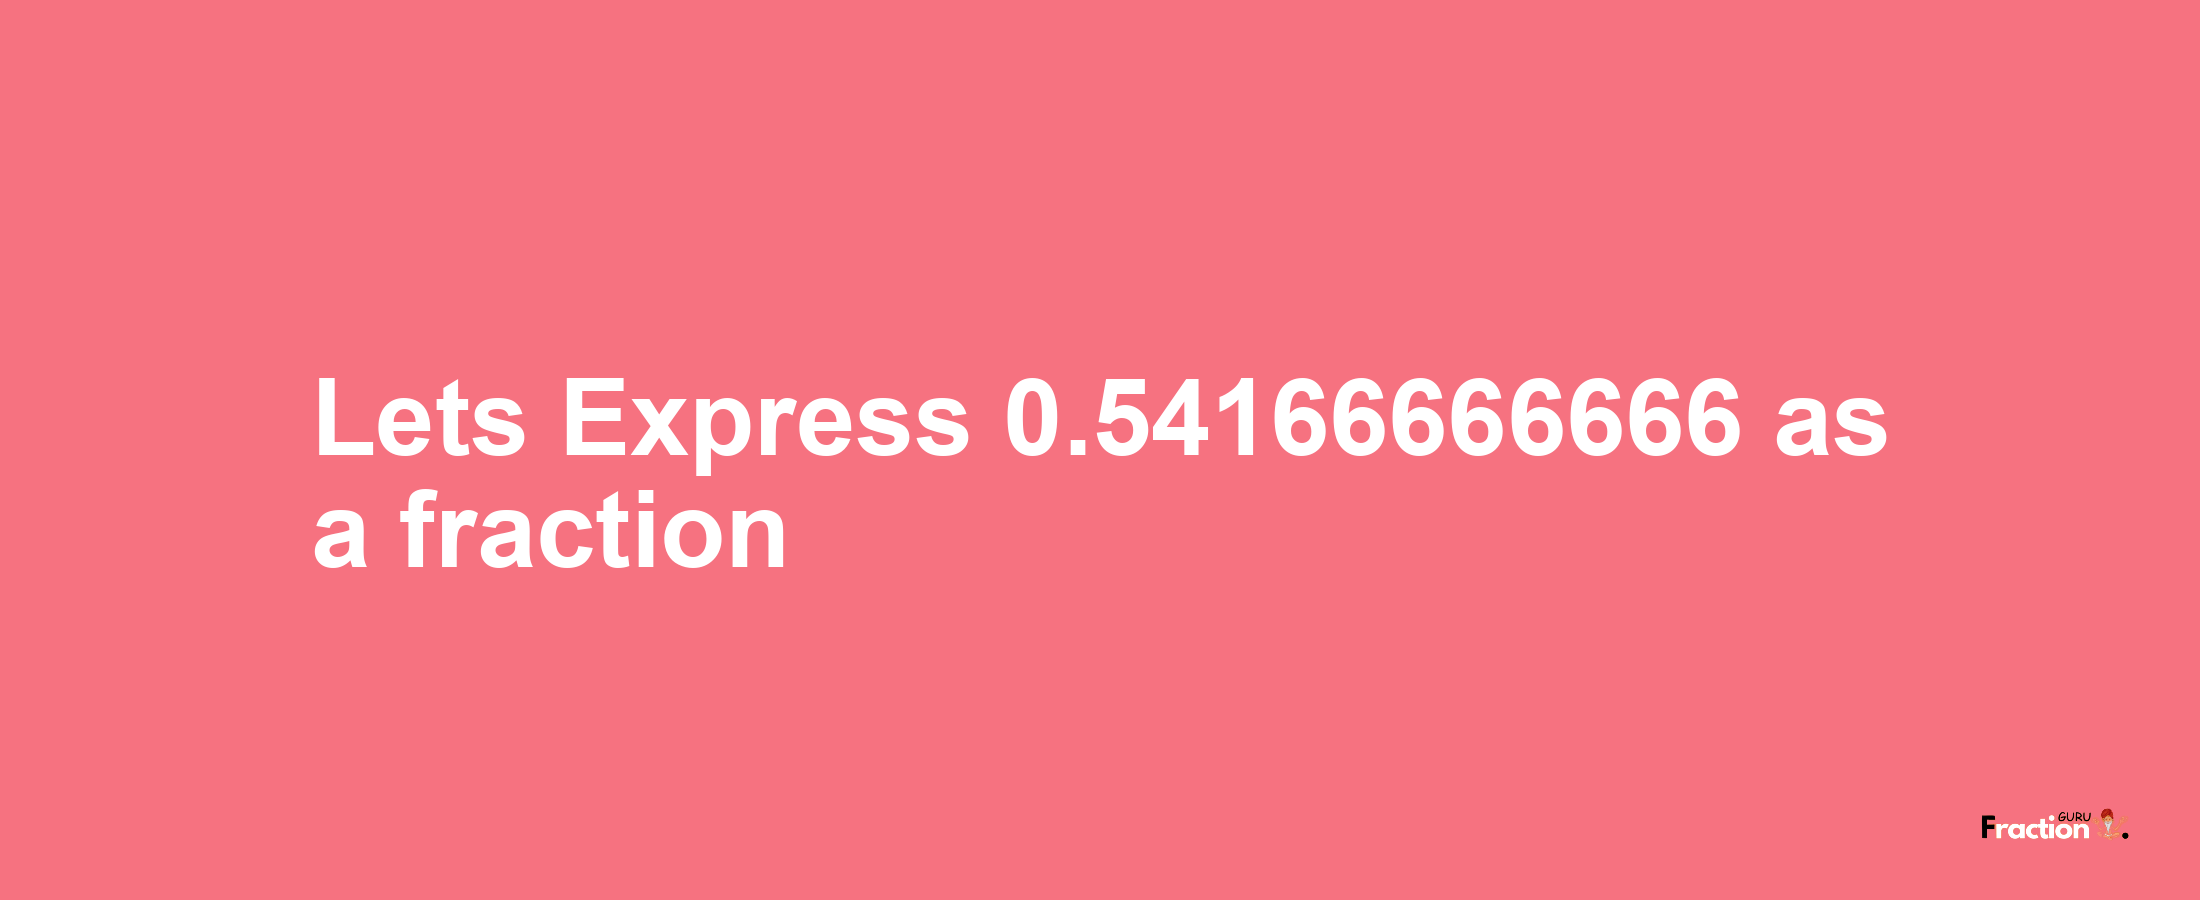 Lets Express 0.54166666666 as afraction